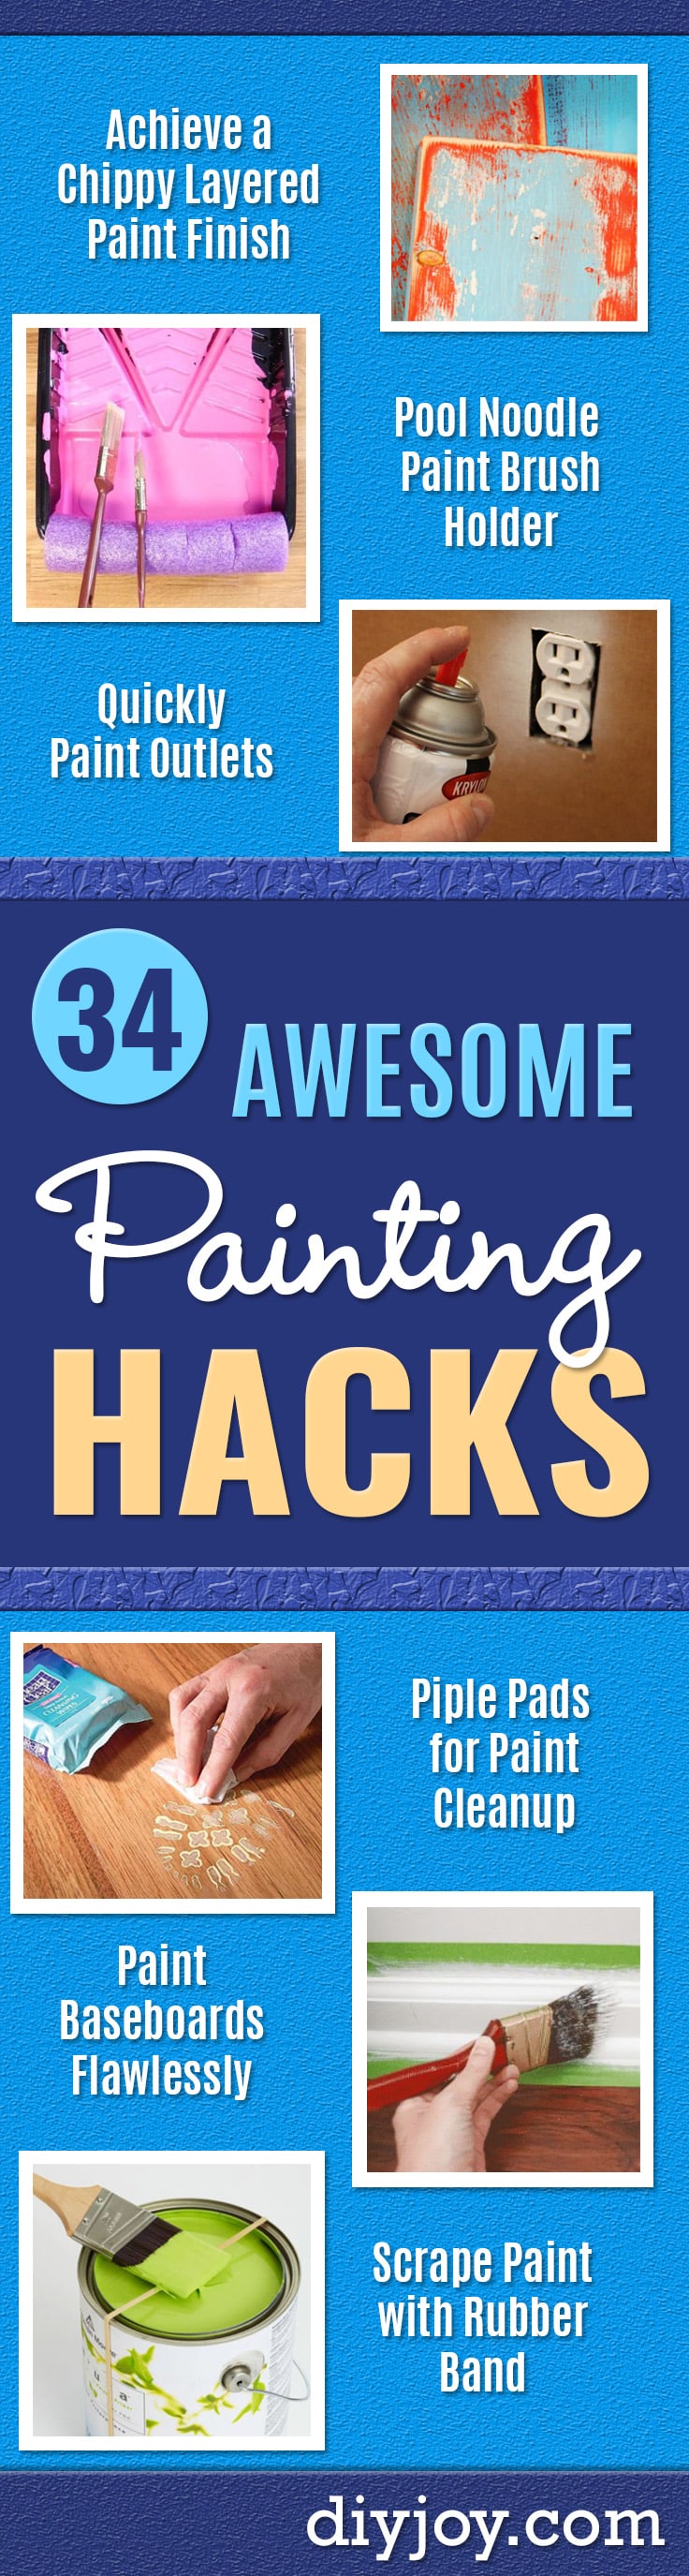 DIY Painting Hacks - Easy Ways To Shortcut House Painting - Wall Prep, Painters Tape, Trim, Edging, Ceiling, Exterior Cutting In, Furniture and Crafts Paint Tips - Paint Your House Or Your Room With These Time Saving Painter Hacks and Quick Tricks http://diyjoy.com/diy-painting-hacks